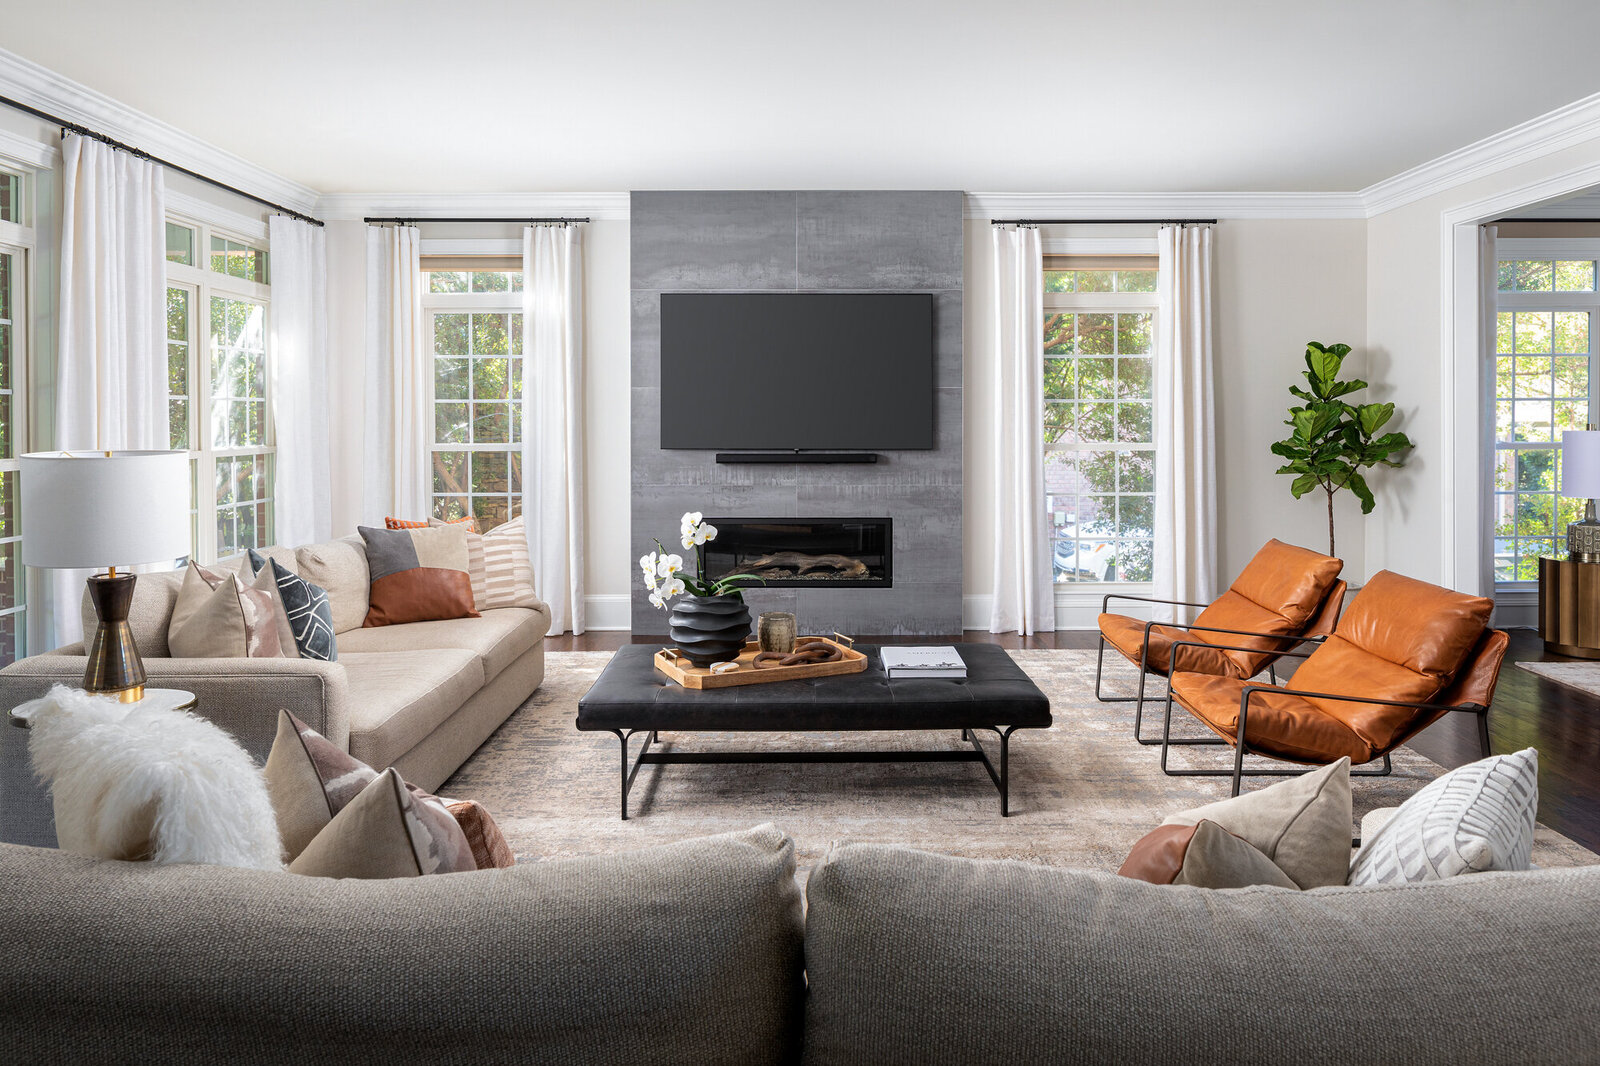 Transitional living room in a beautiful Waxhaw home. Design by Gracious Home Interiors.